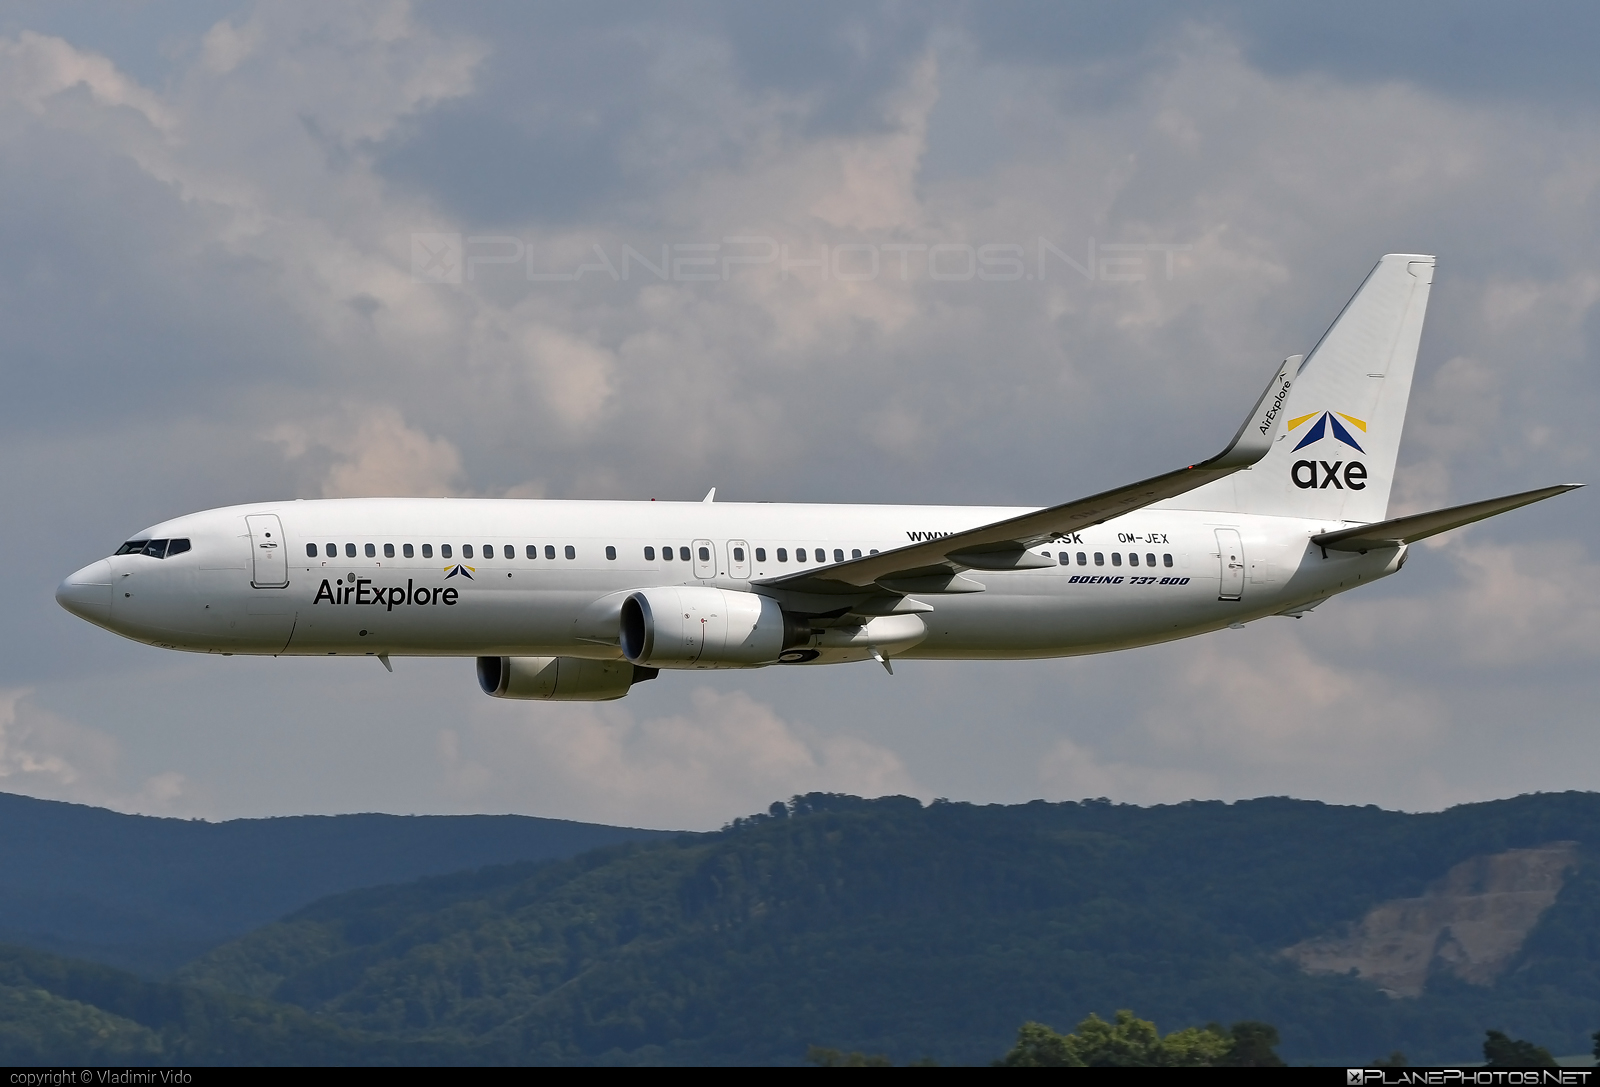 Boeing 737-800 - OM-JEX operated by AirExplore #AirExplore #b737 #b737nextgen #b737ng #boeing #boeing737